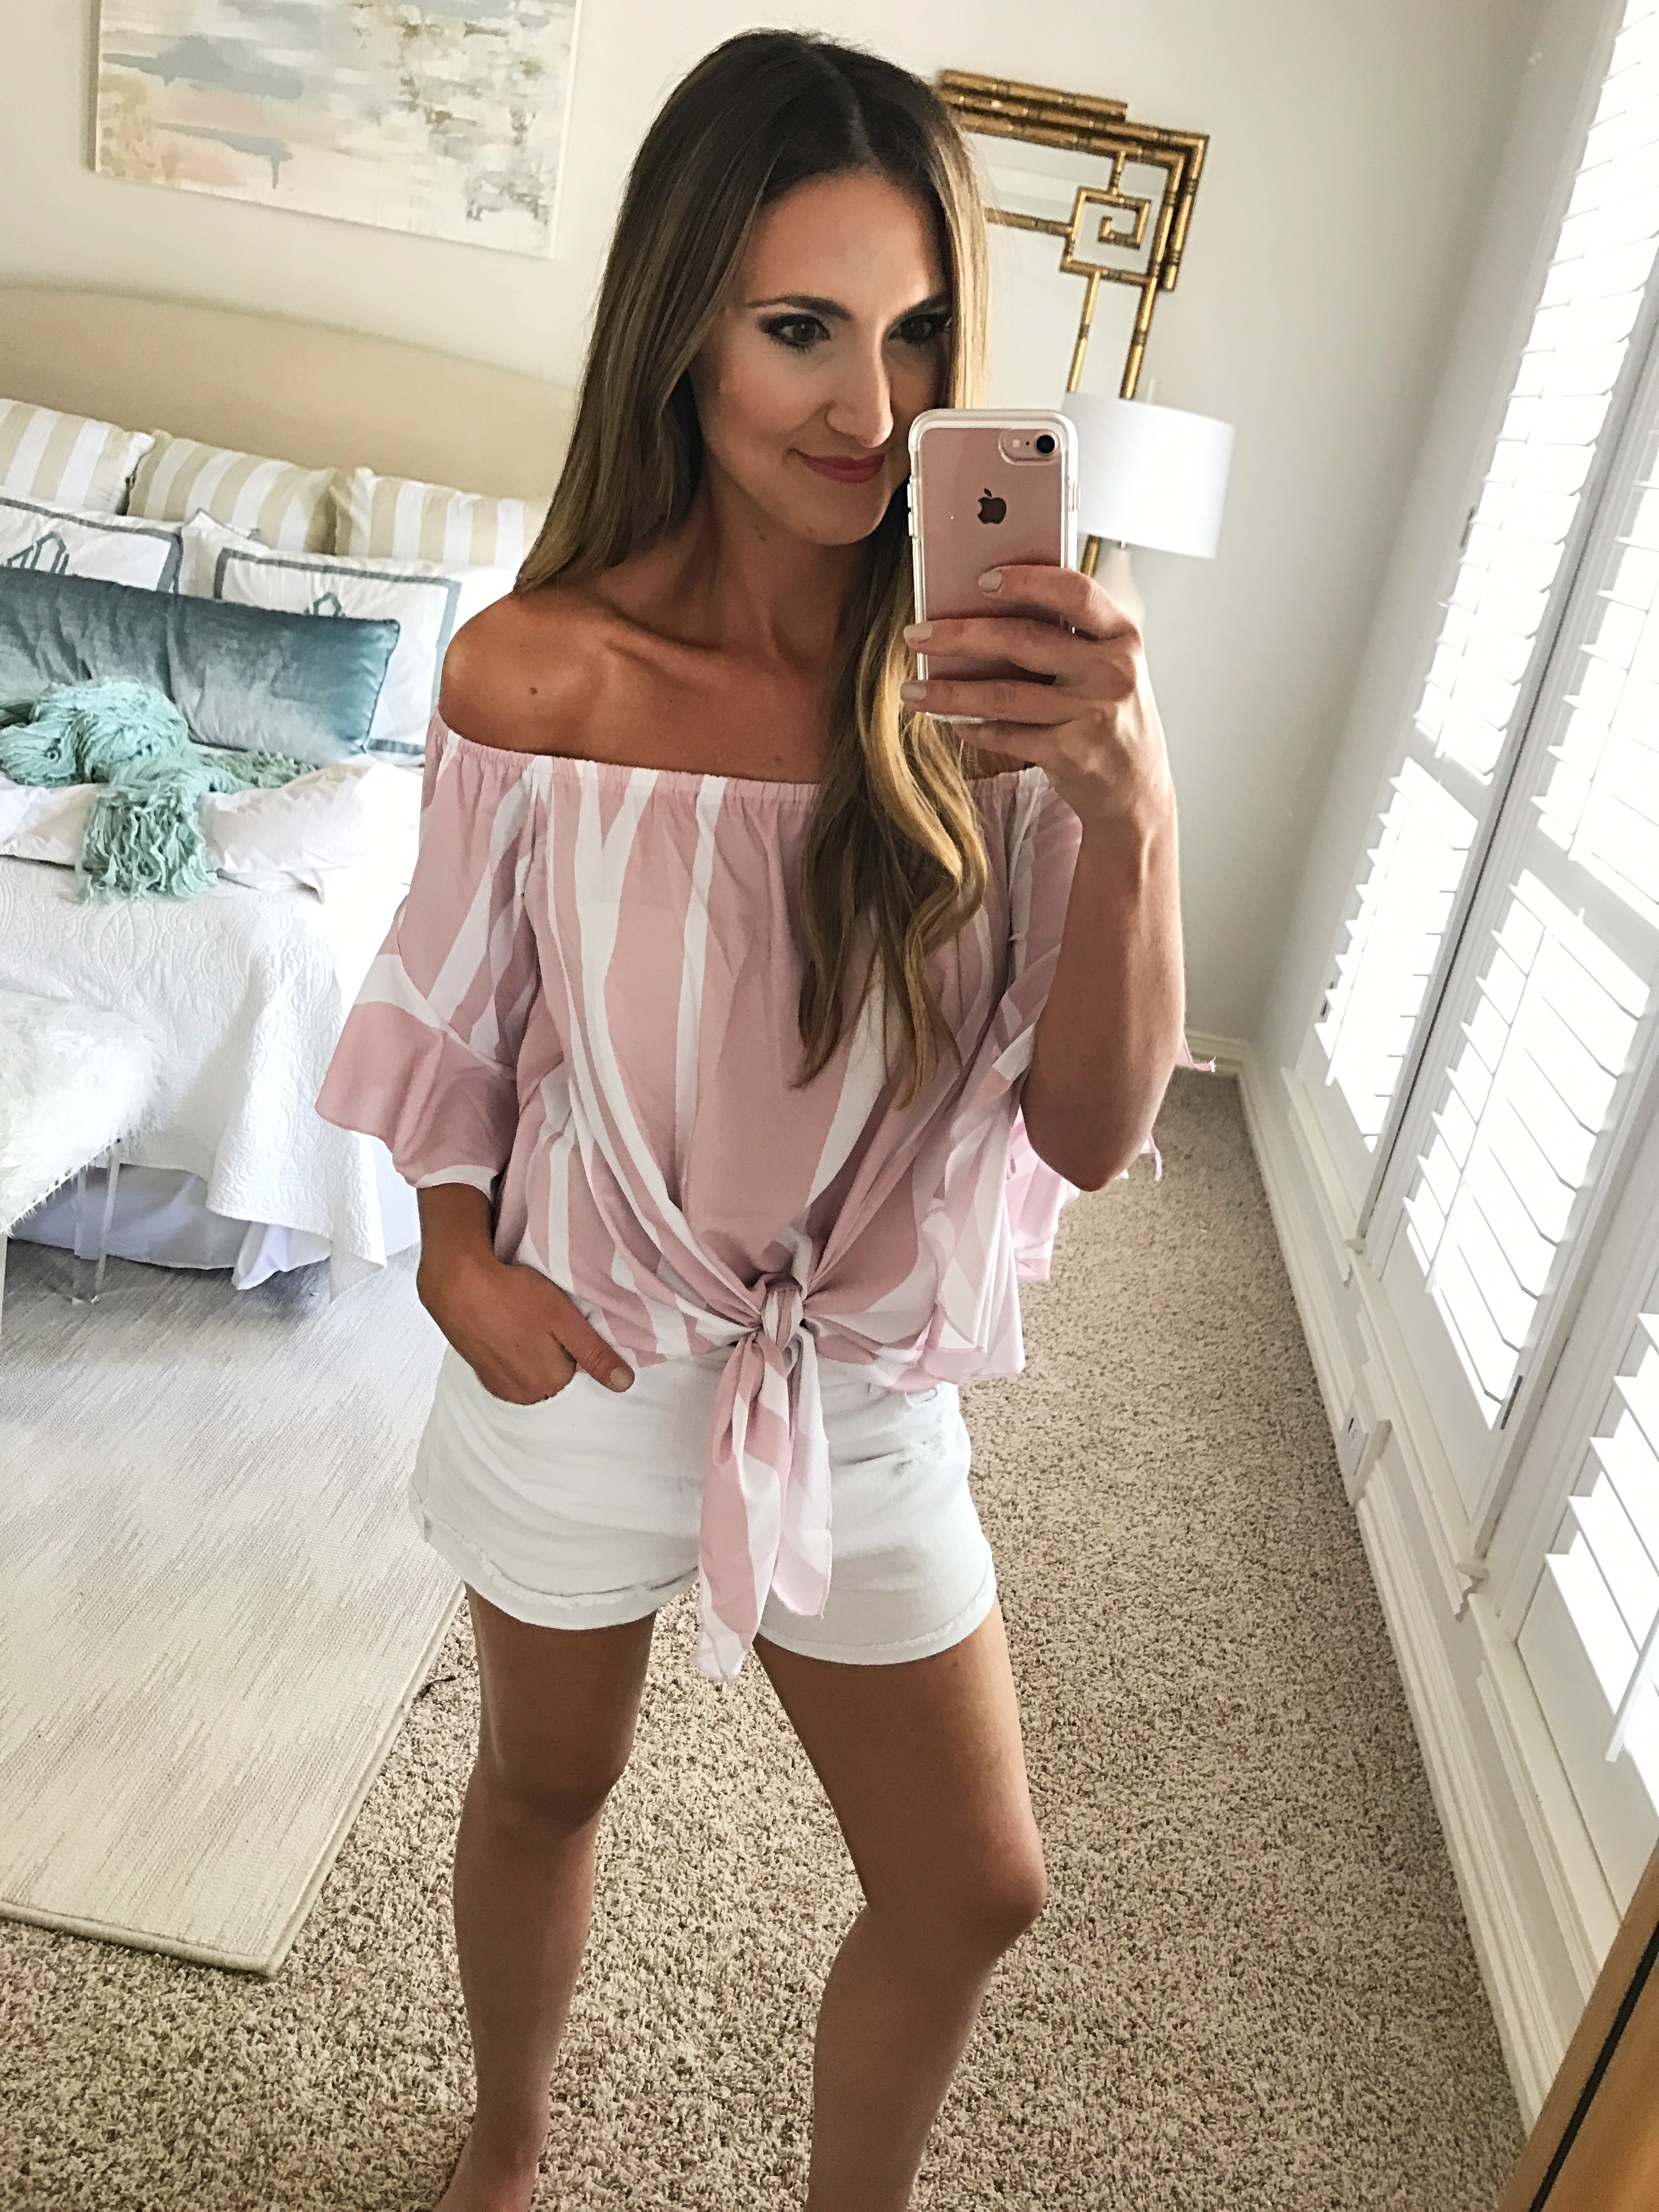 Amazon Prime Day Fashion Haul - Top 10 Most Purchased Items- JULY! featured by popular Dallas fashion blogger Style Your Senses